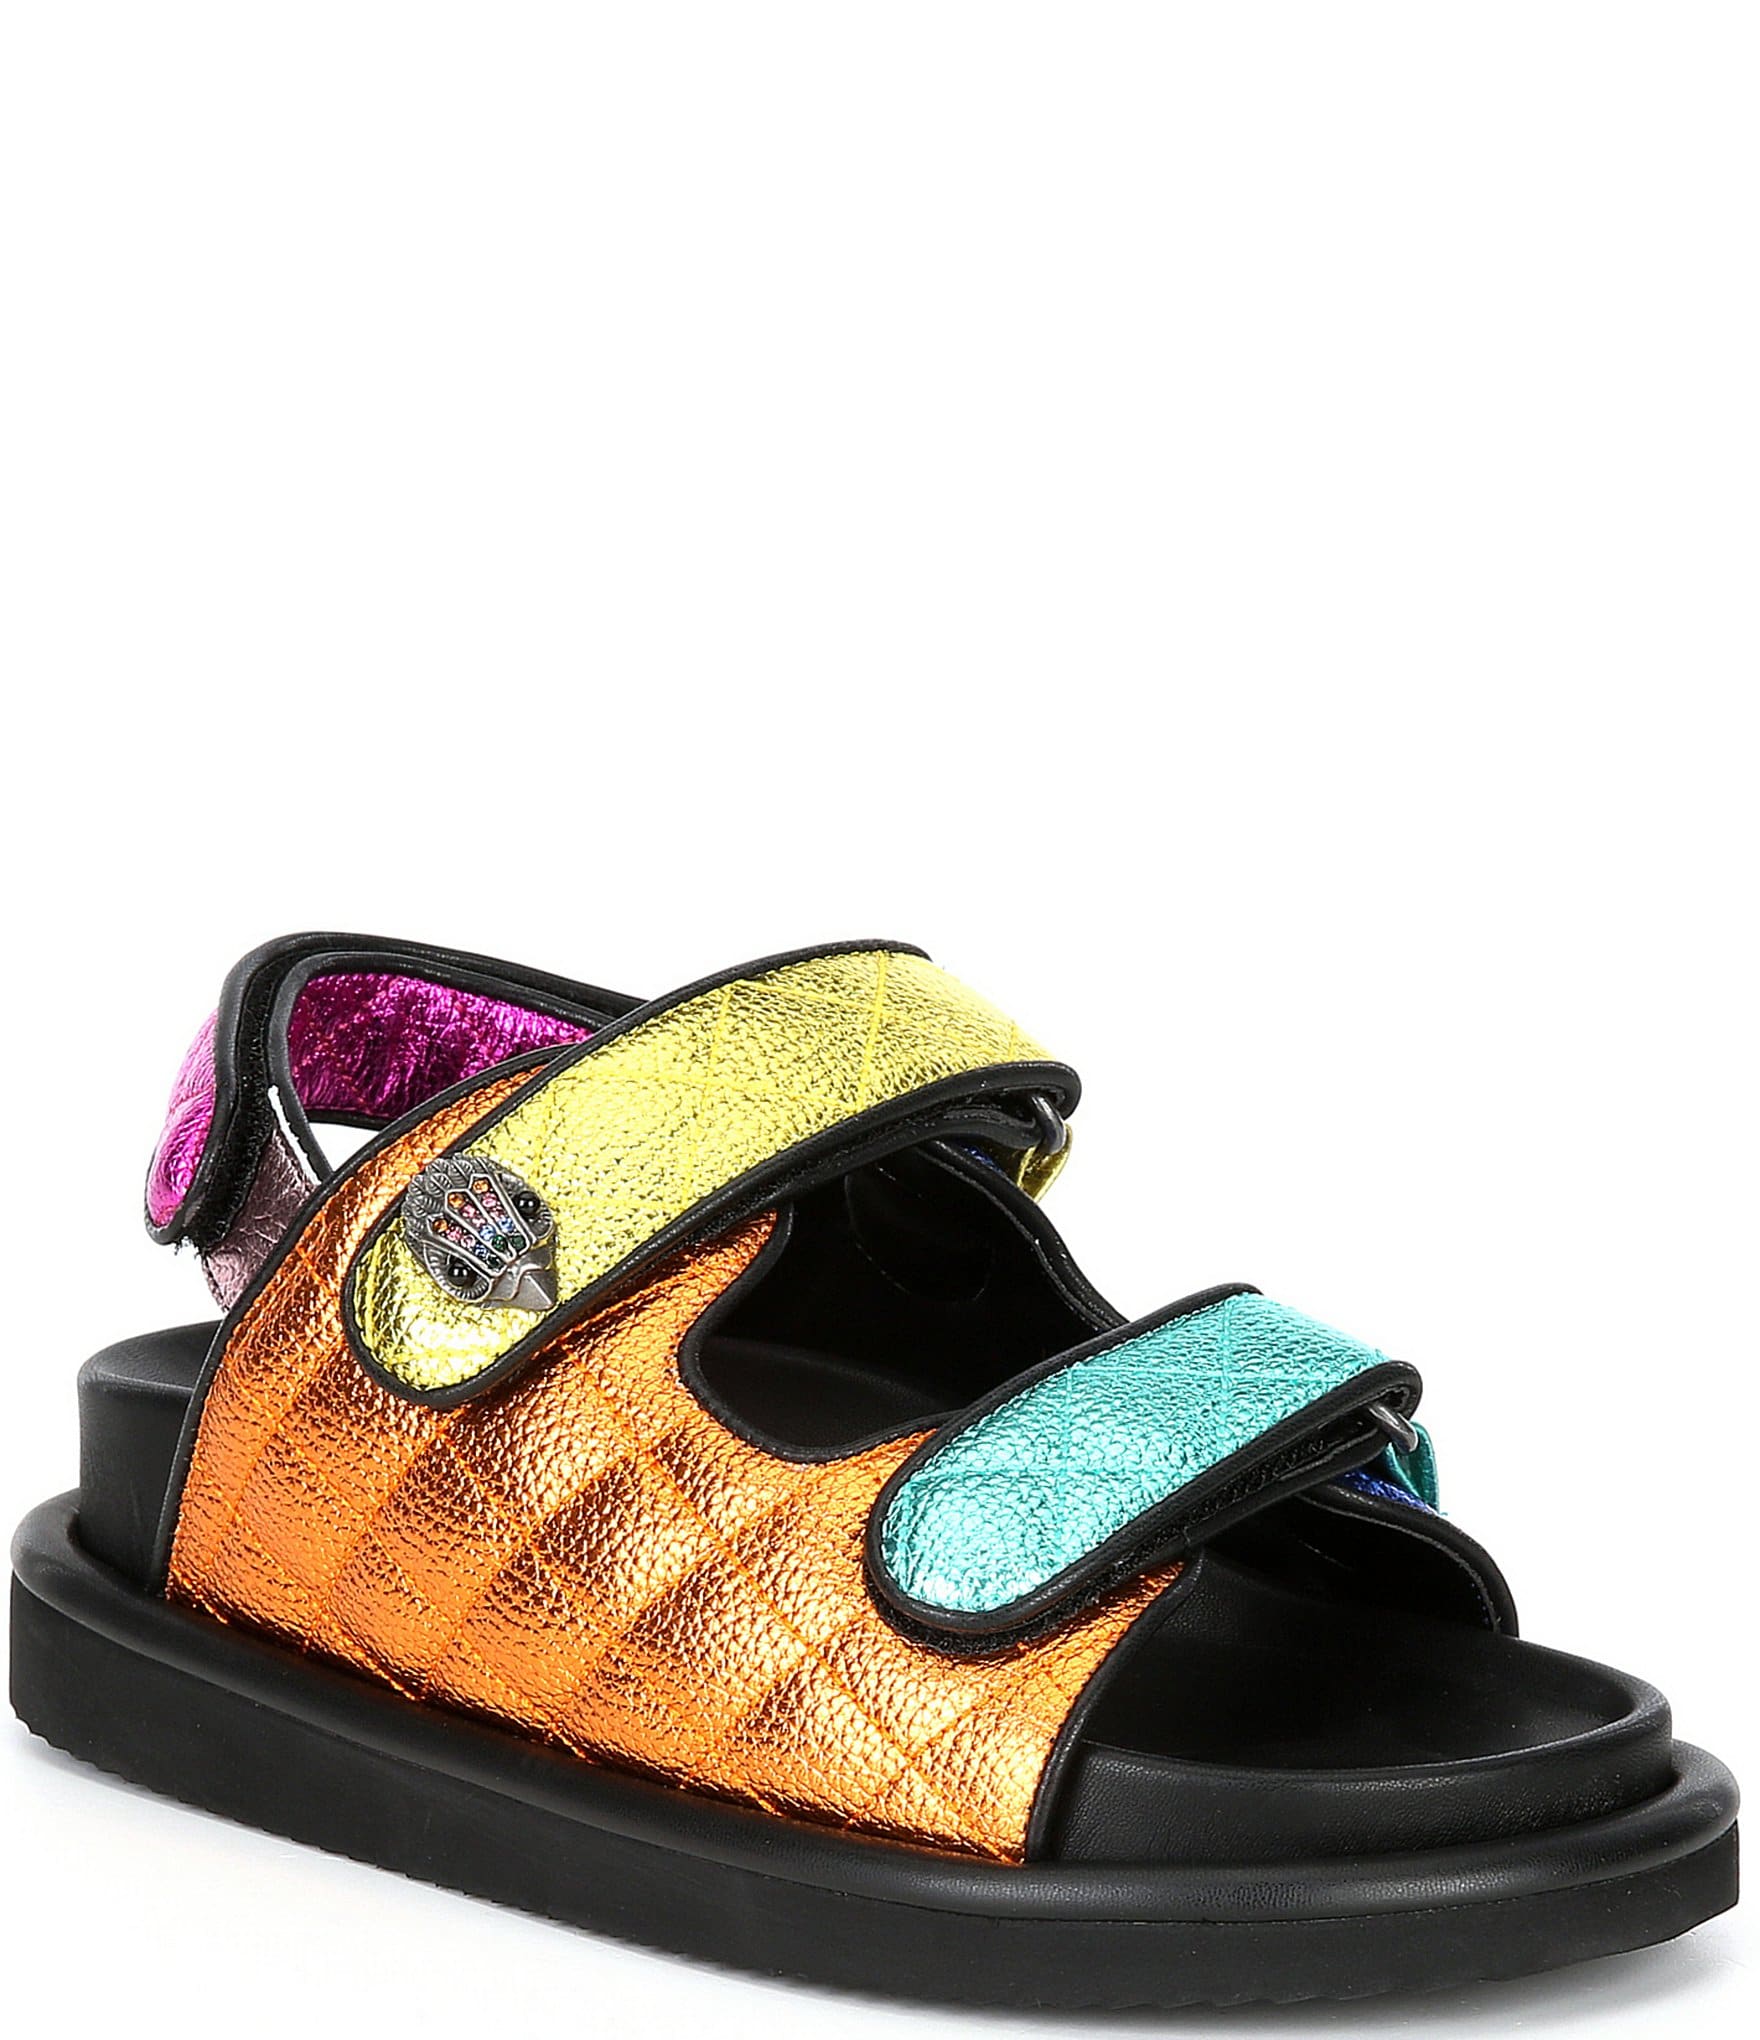 Black Shearling-lined quilted-leather sandals